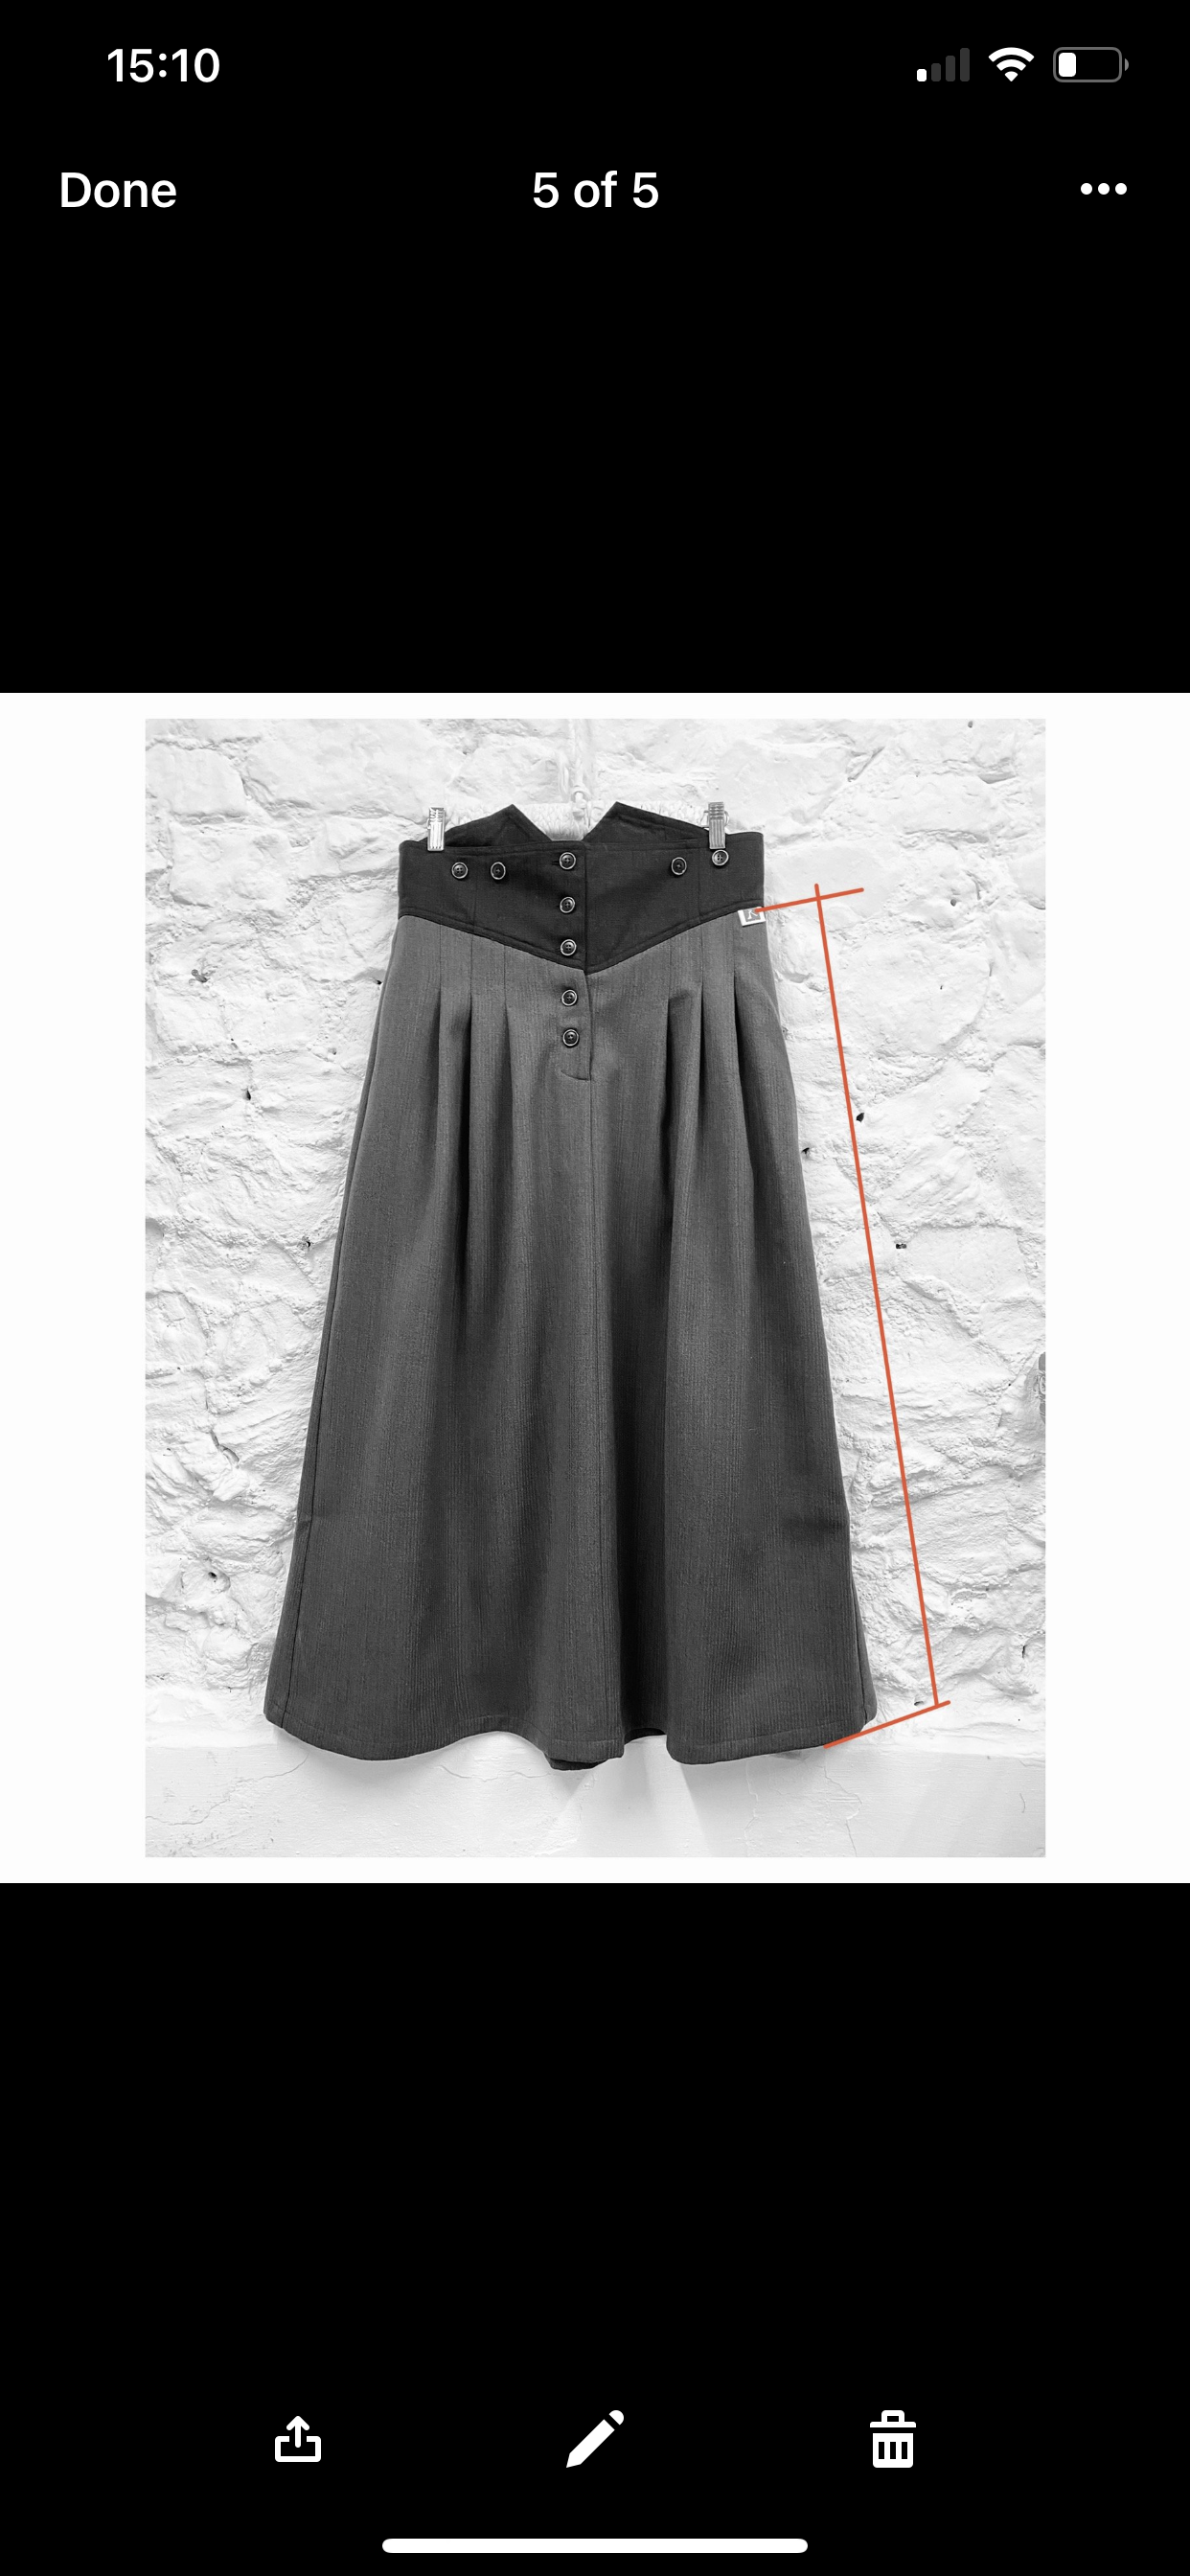 High wastes skirt - dark grey and teal flex - made to order